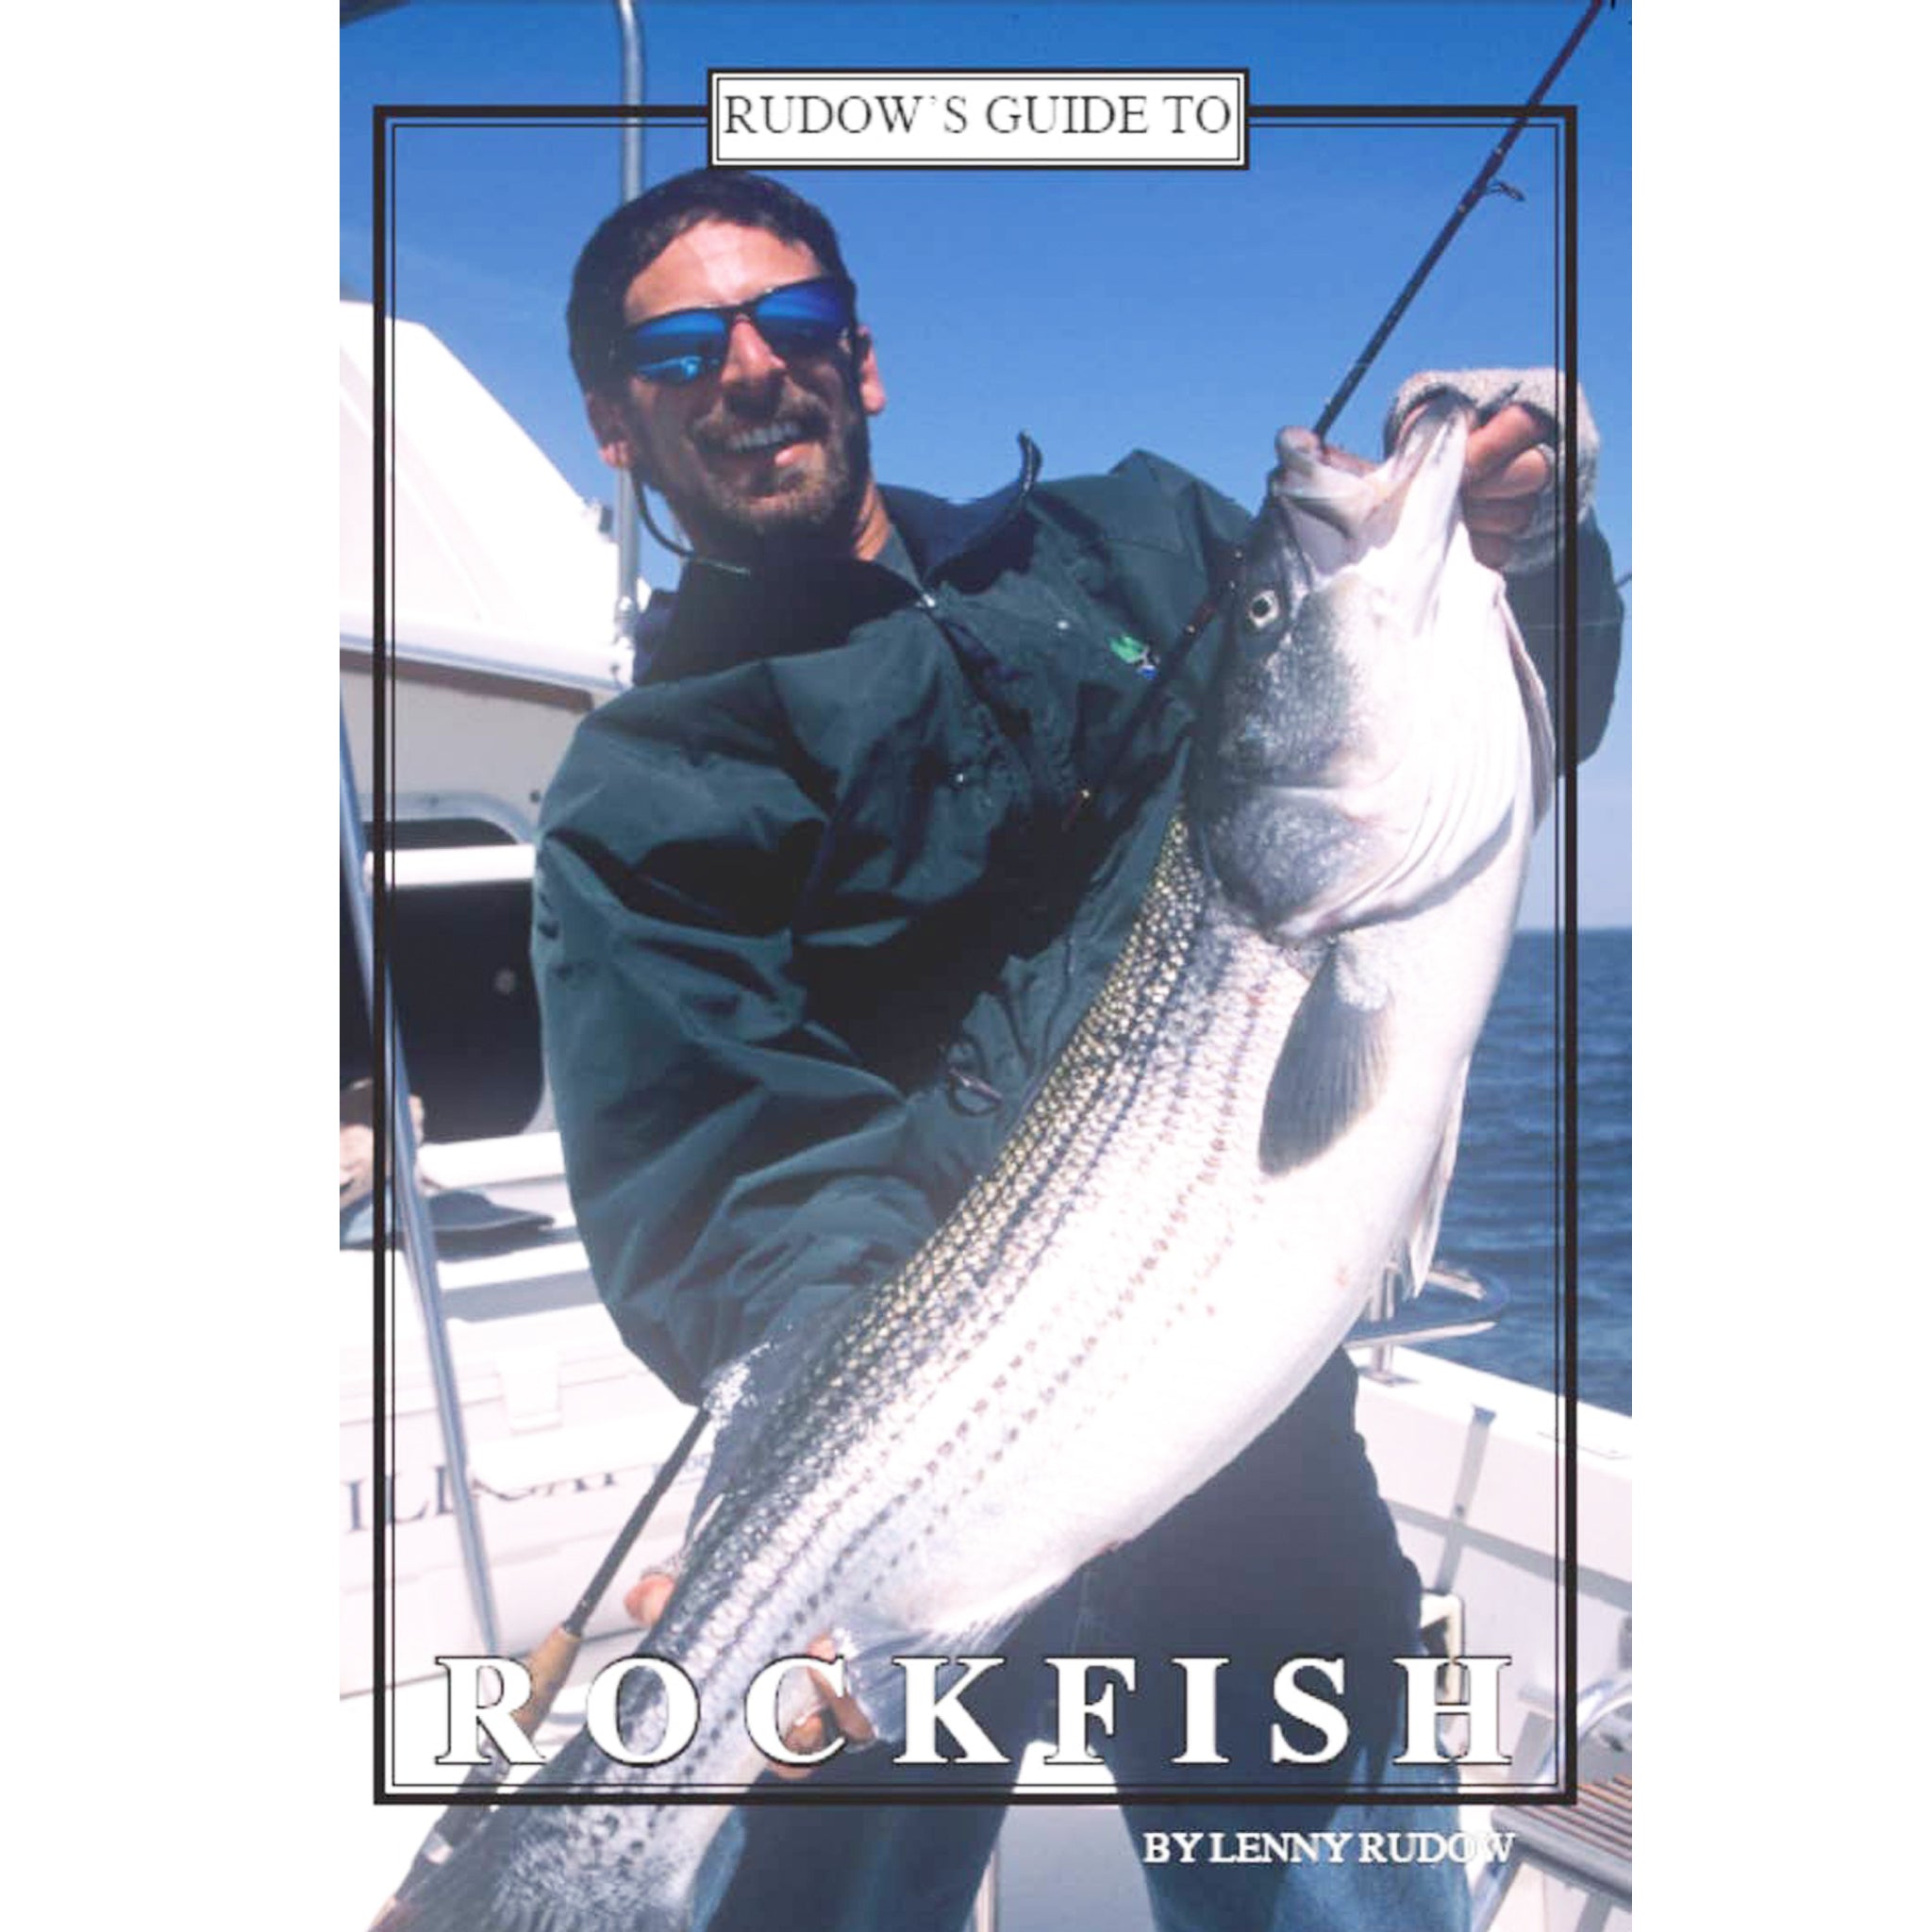 Rudow's Guide to Rockfish [Book]